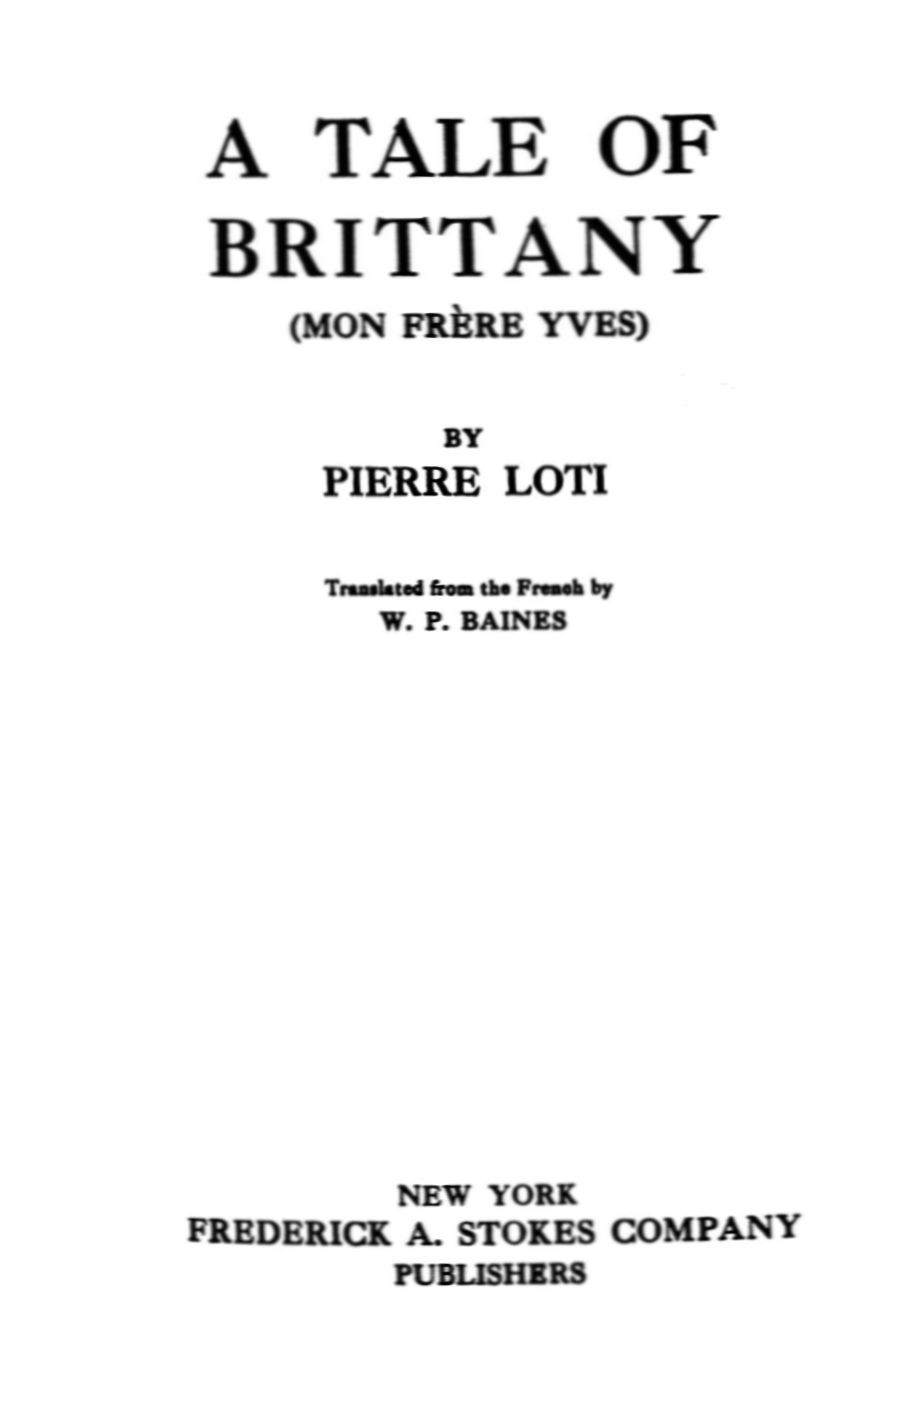 The Project Gutenberg eBook of A Tale of Brittany by Pierre Loti.